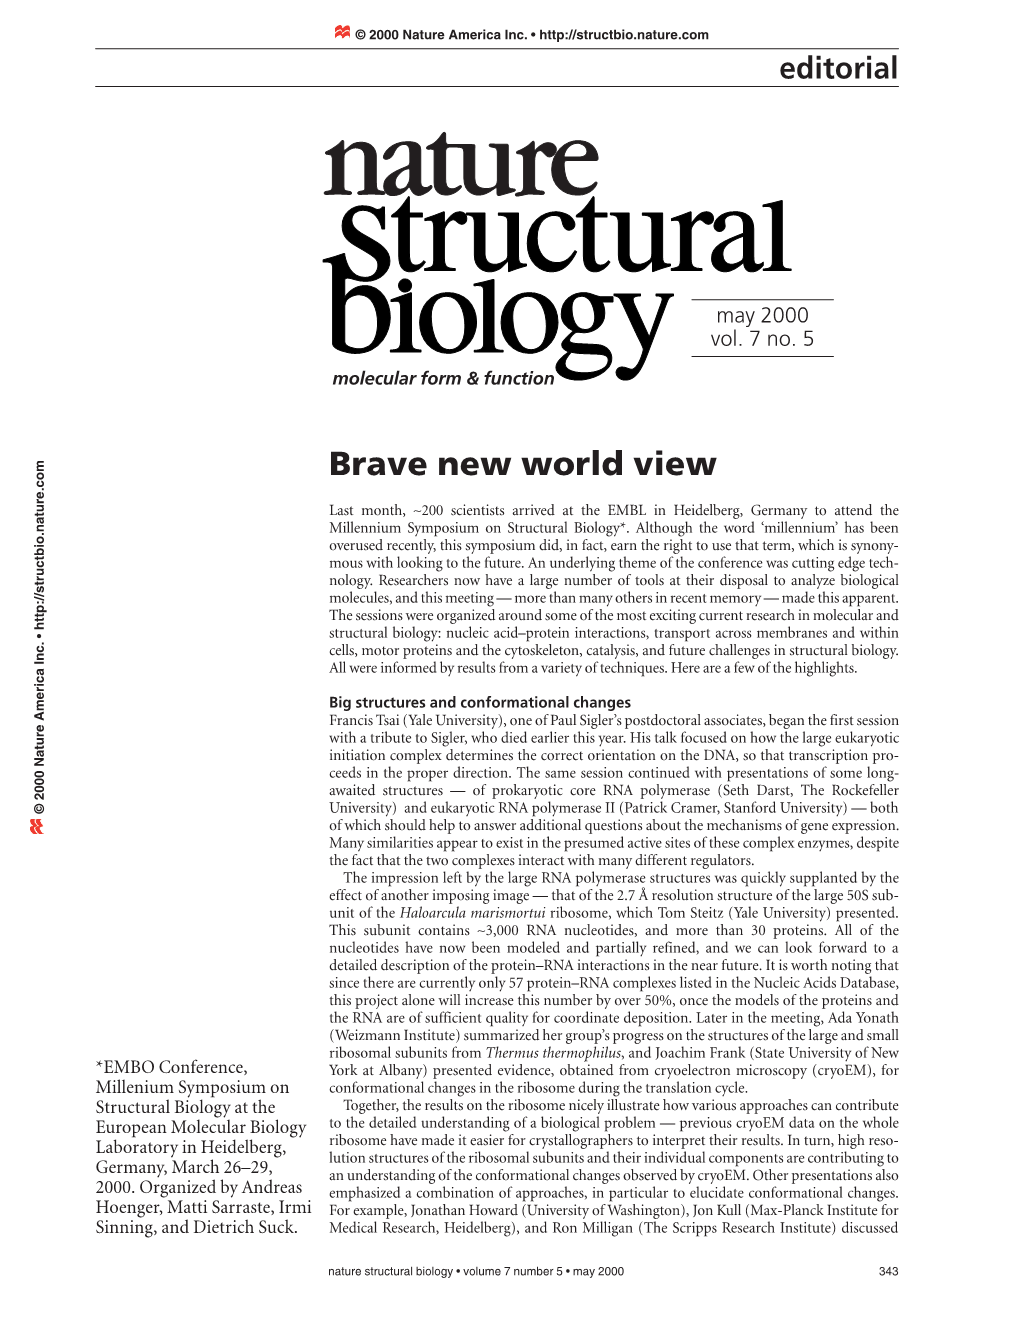 Brave New World View .Com Last Month, ∼200 Scientists Arrived at the EMBL in Heidelberg, Germany to Attend the Millennium Symposium on Structural Biology*